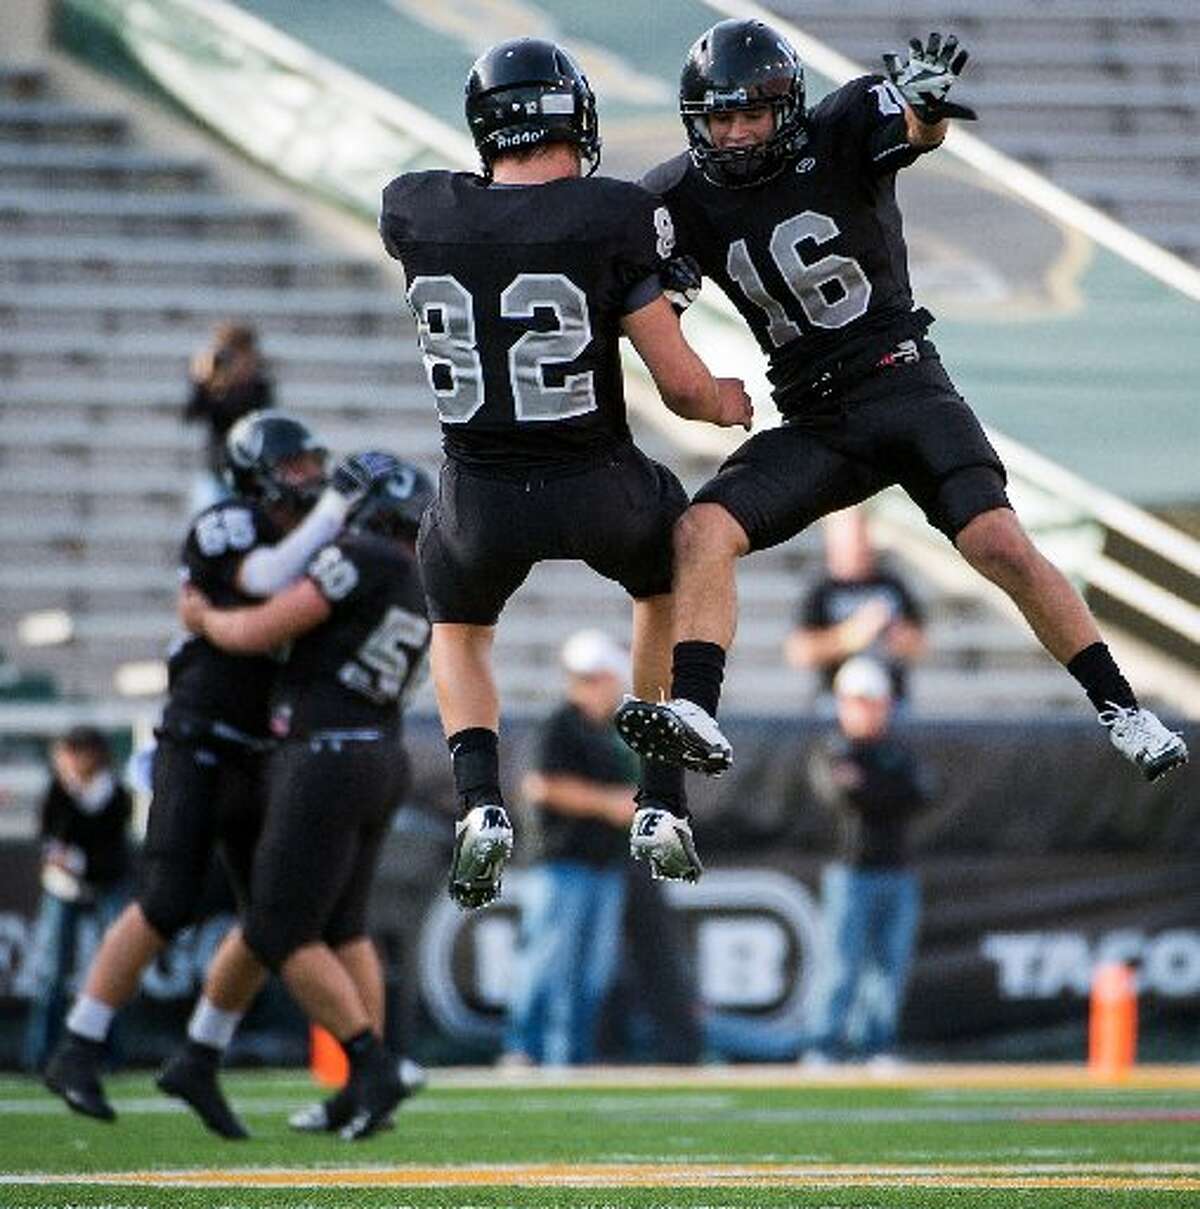 Cibolo Steele defensive back Tyler Petoskey (16) and tight end Matthew Moen (82) celebrate after the Knights recovered a Katy fumble during the second quarterin a Class 5A Division II state high school football semifinal game at Floyd Casey Stadium on Saturday, Dec. 15, 2012, in Waco.